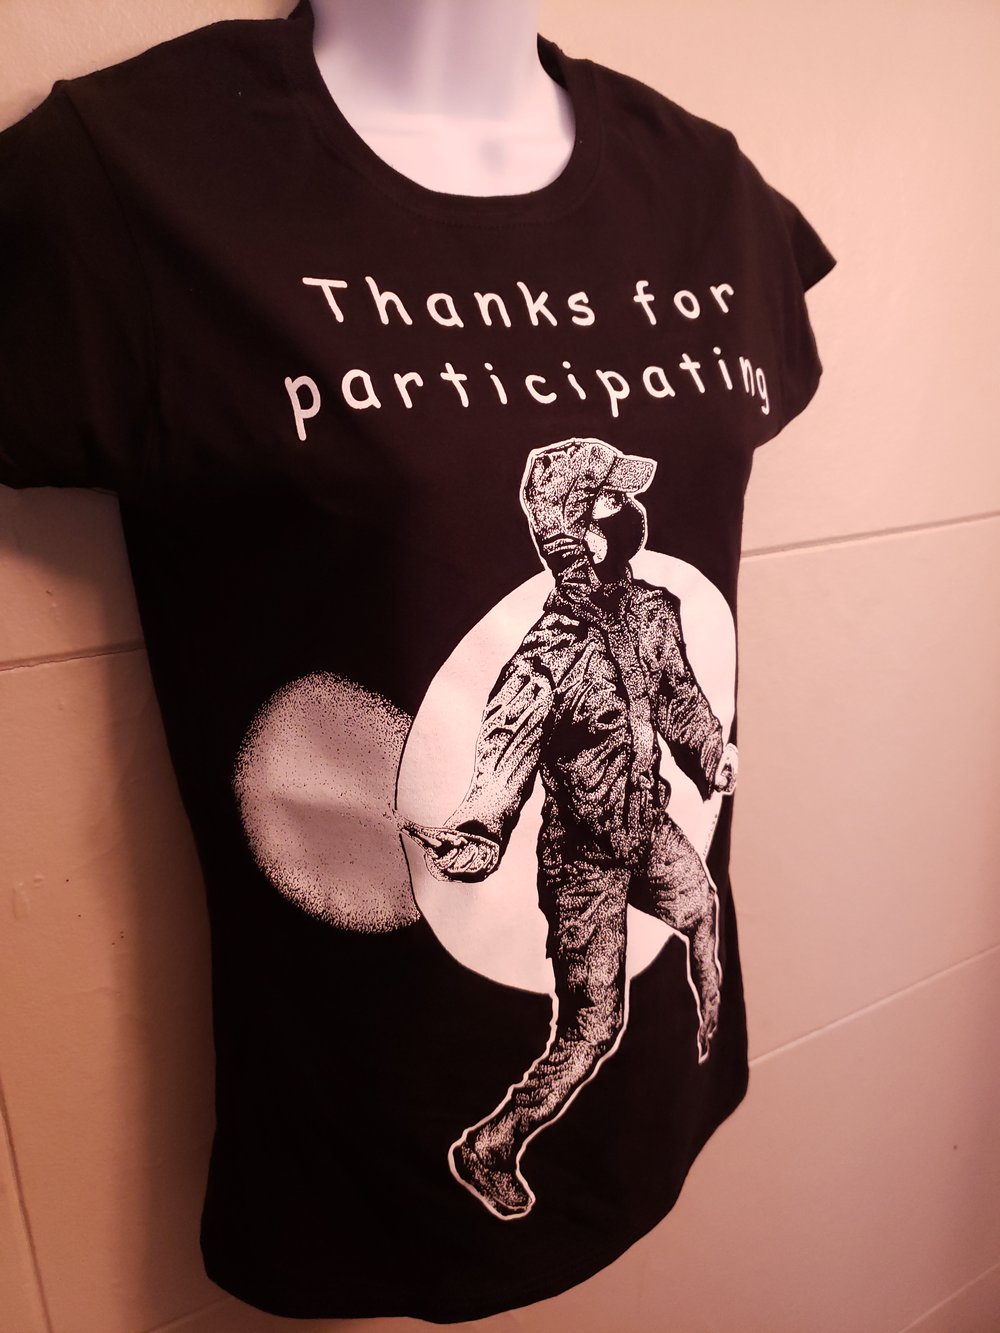 "Thanks for Participating" tees